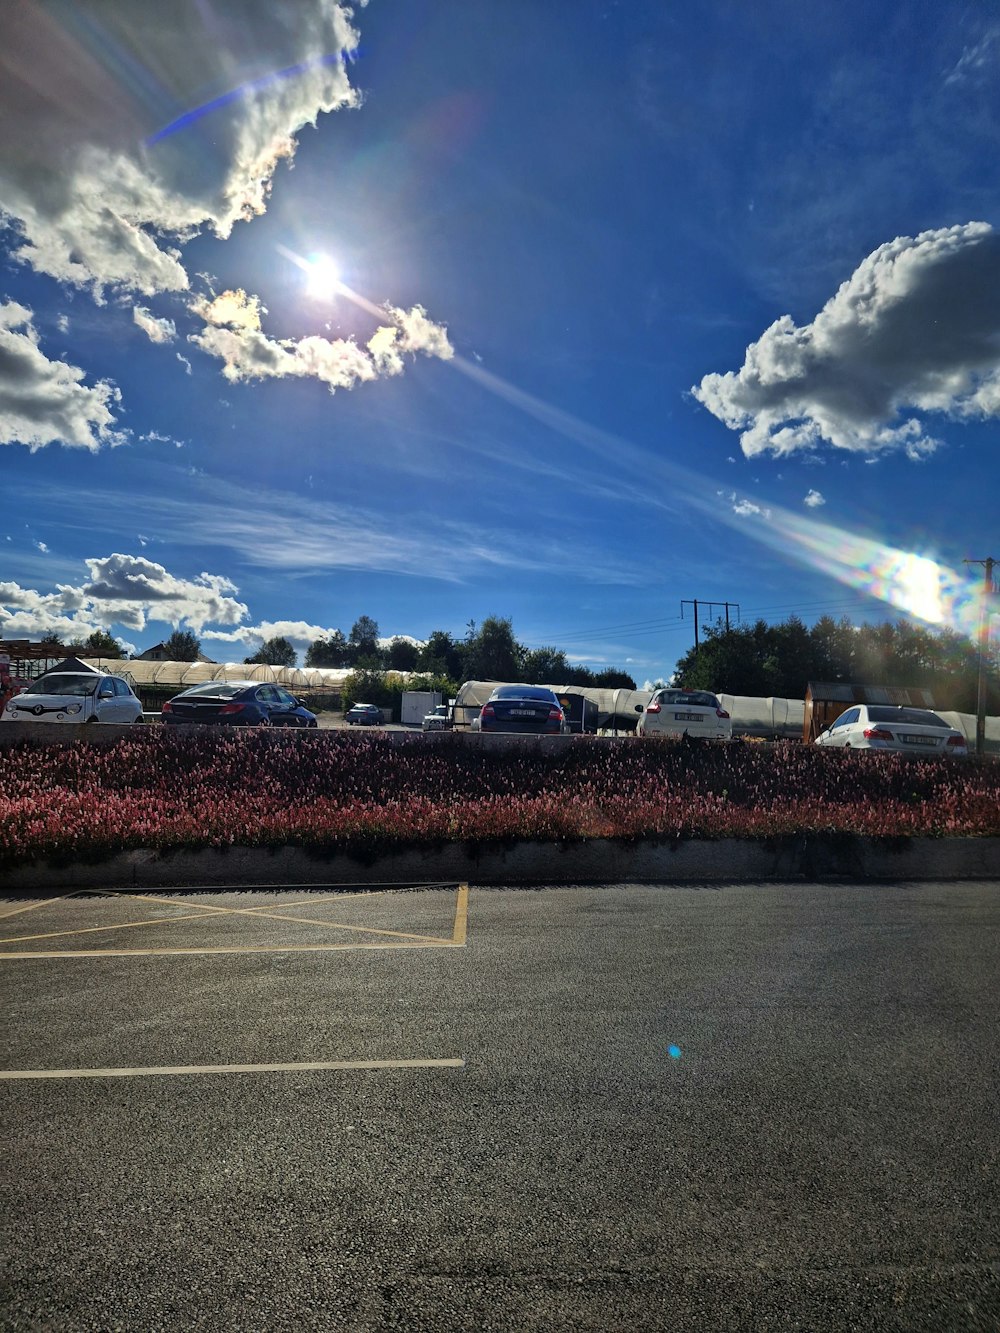 a parking lot with cars and a blue sky with clouds